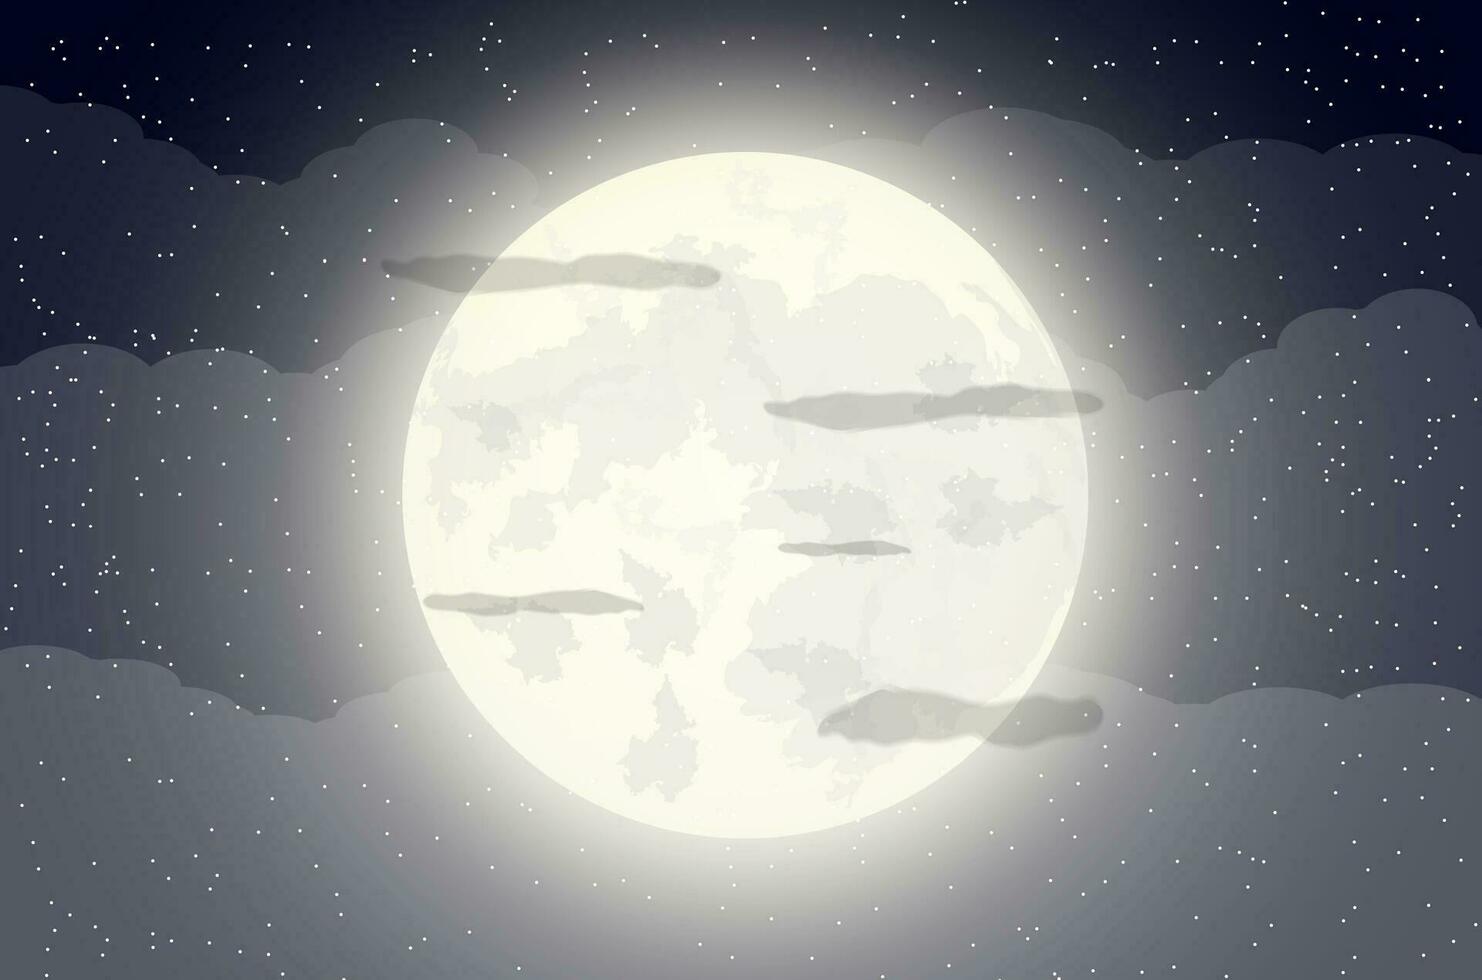 Night cloudy sky with stars and moon. Vector illustration